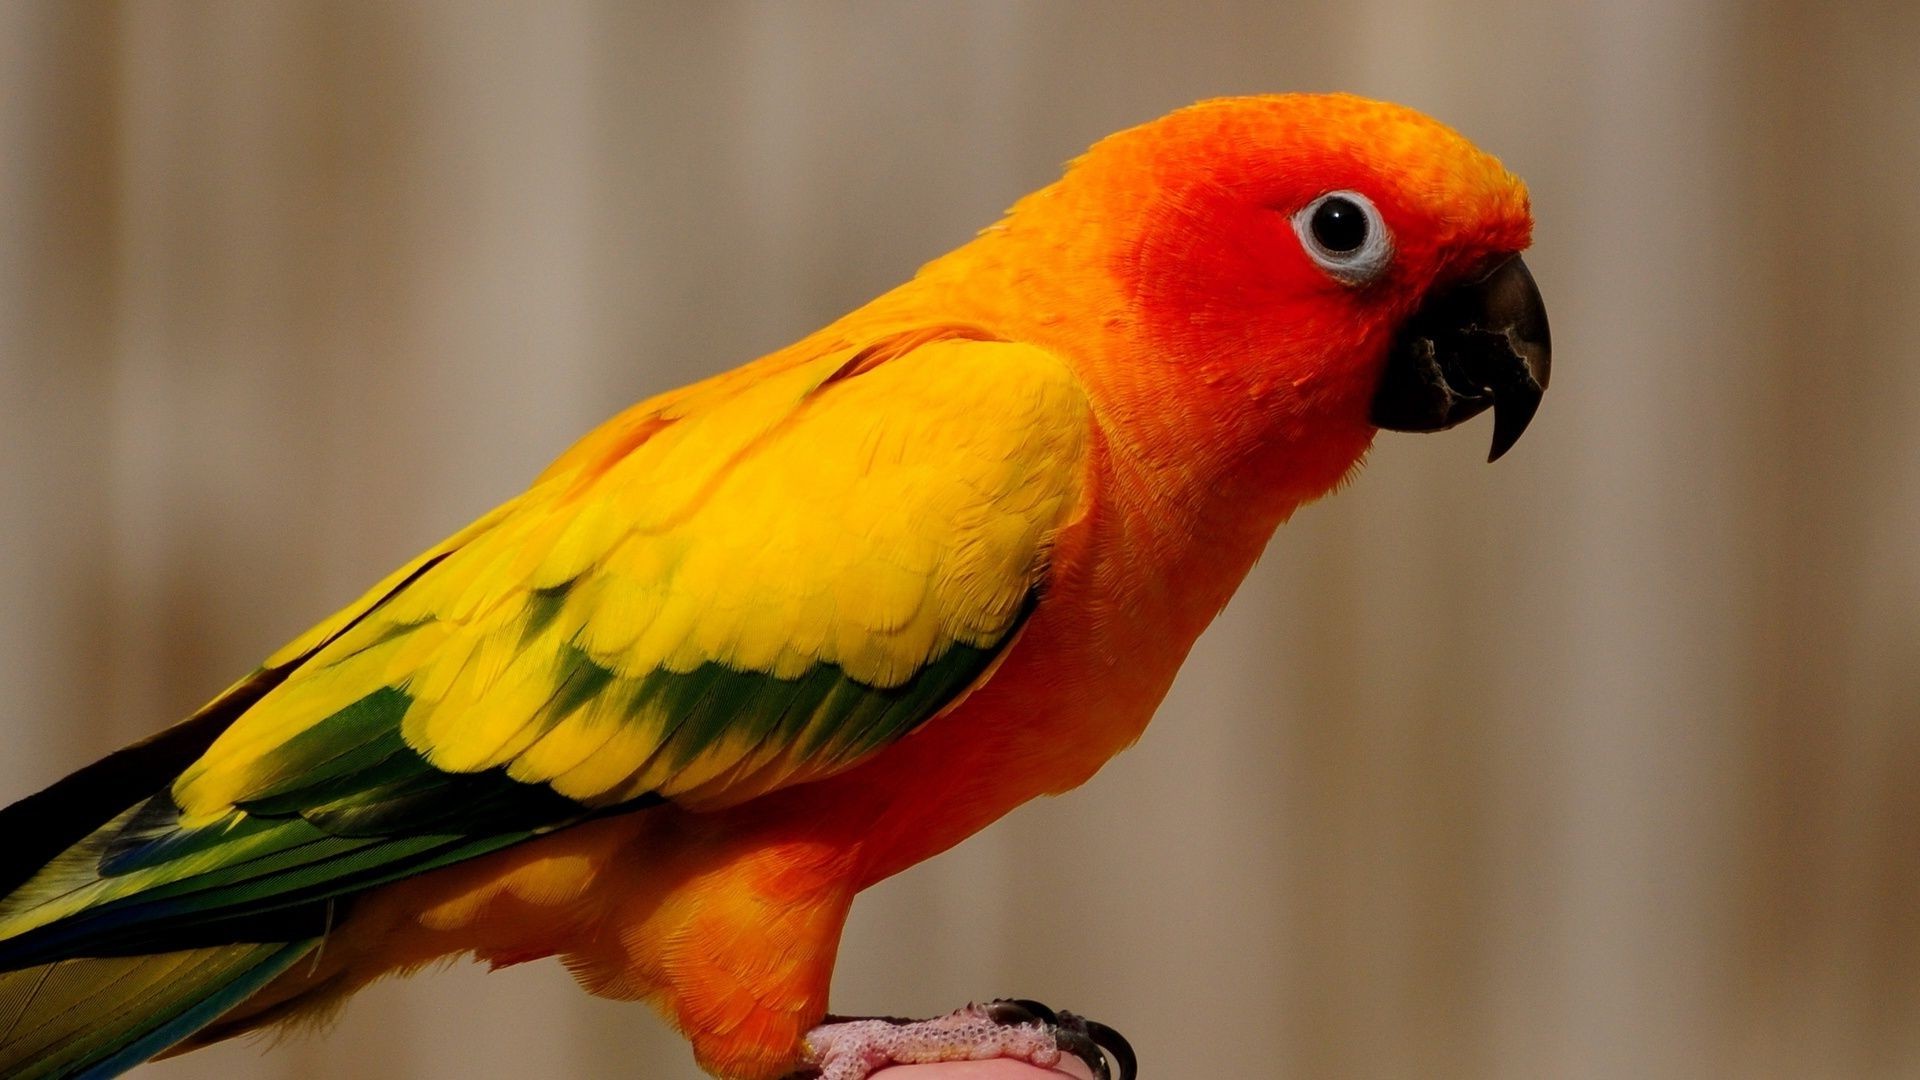 Pet Birds That Are Great for Everyone